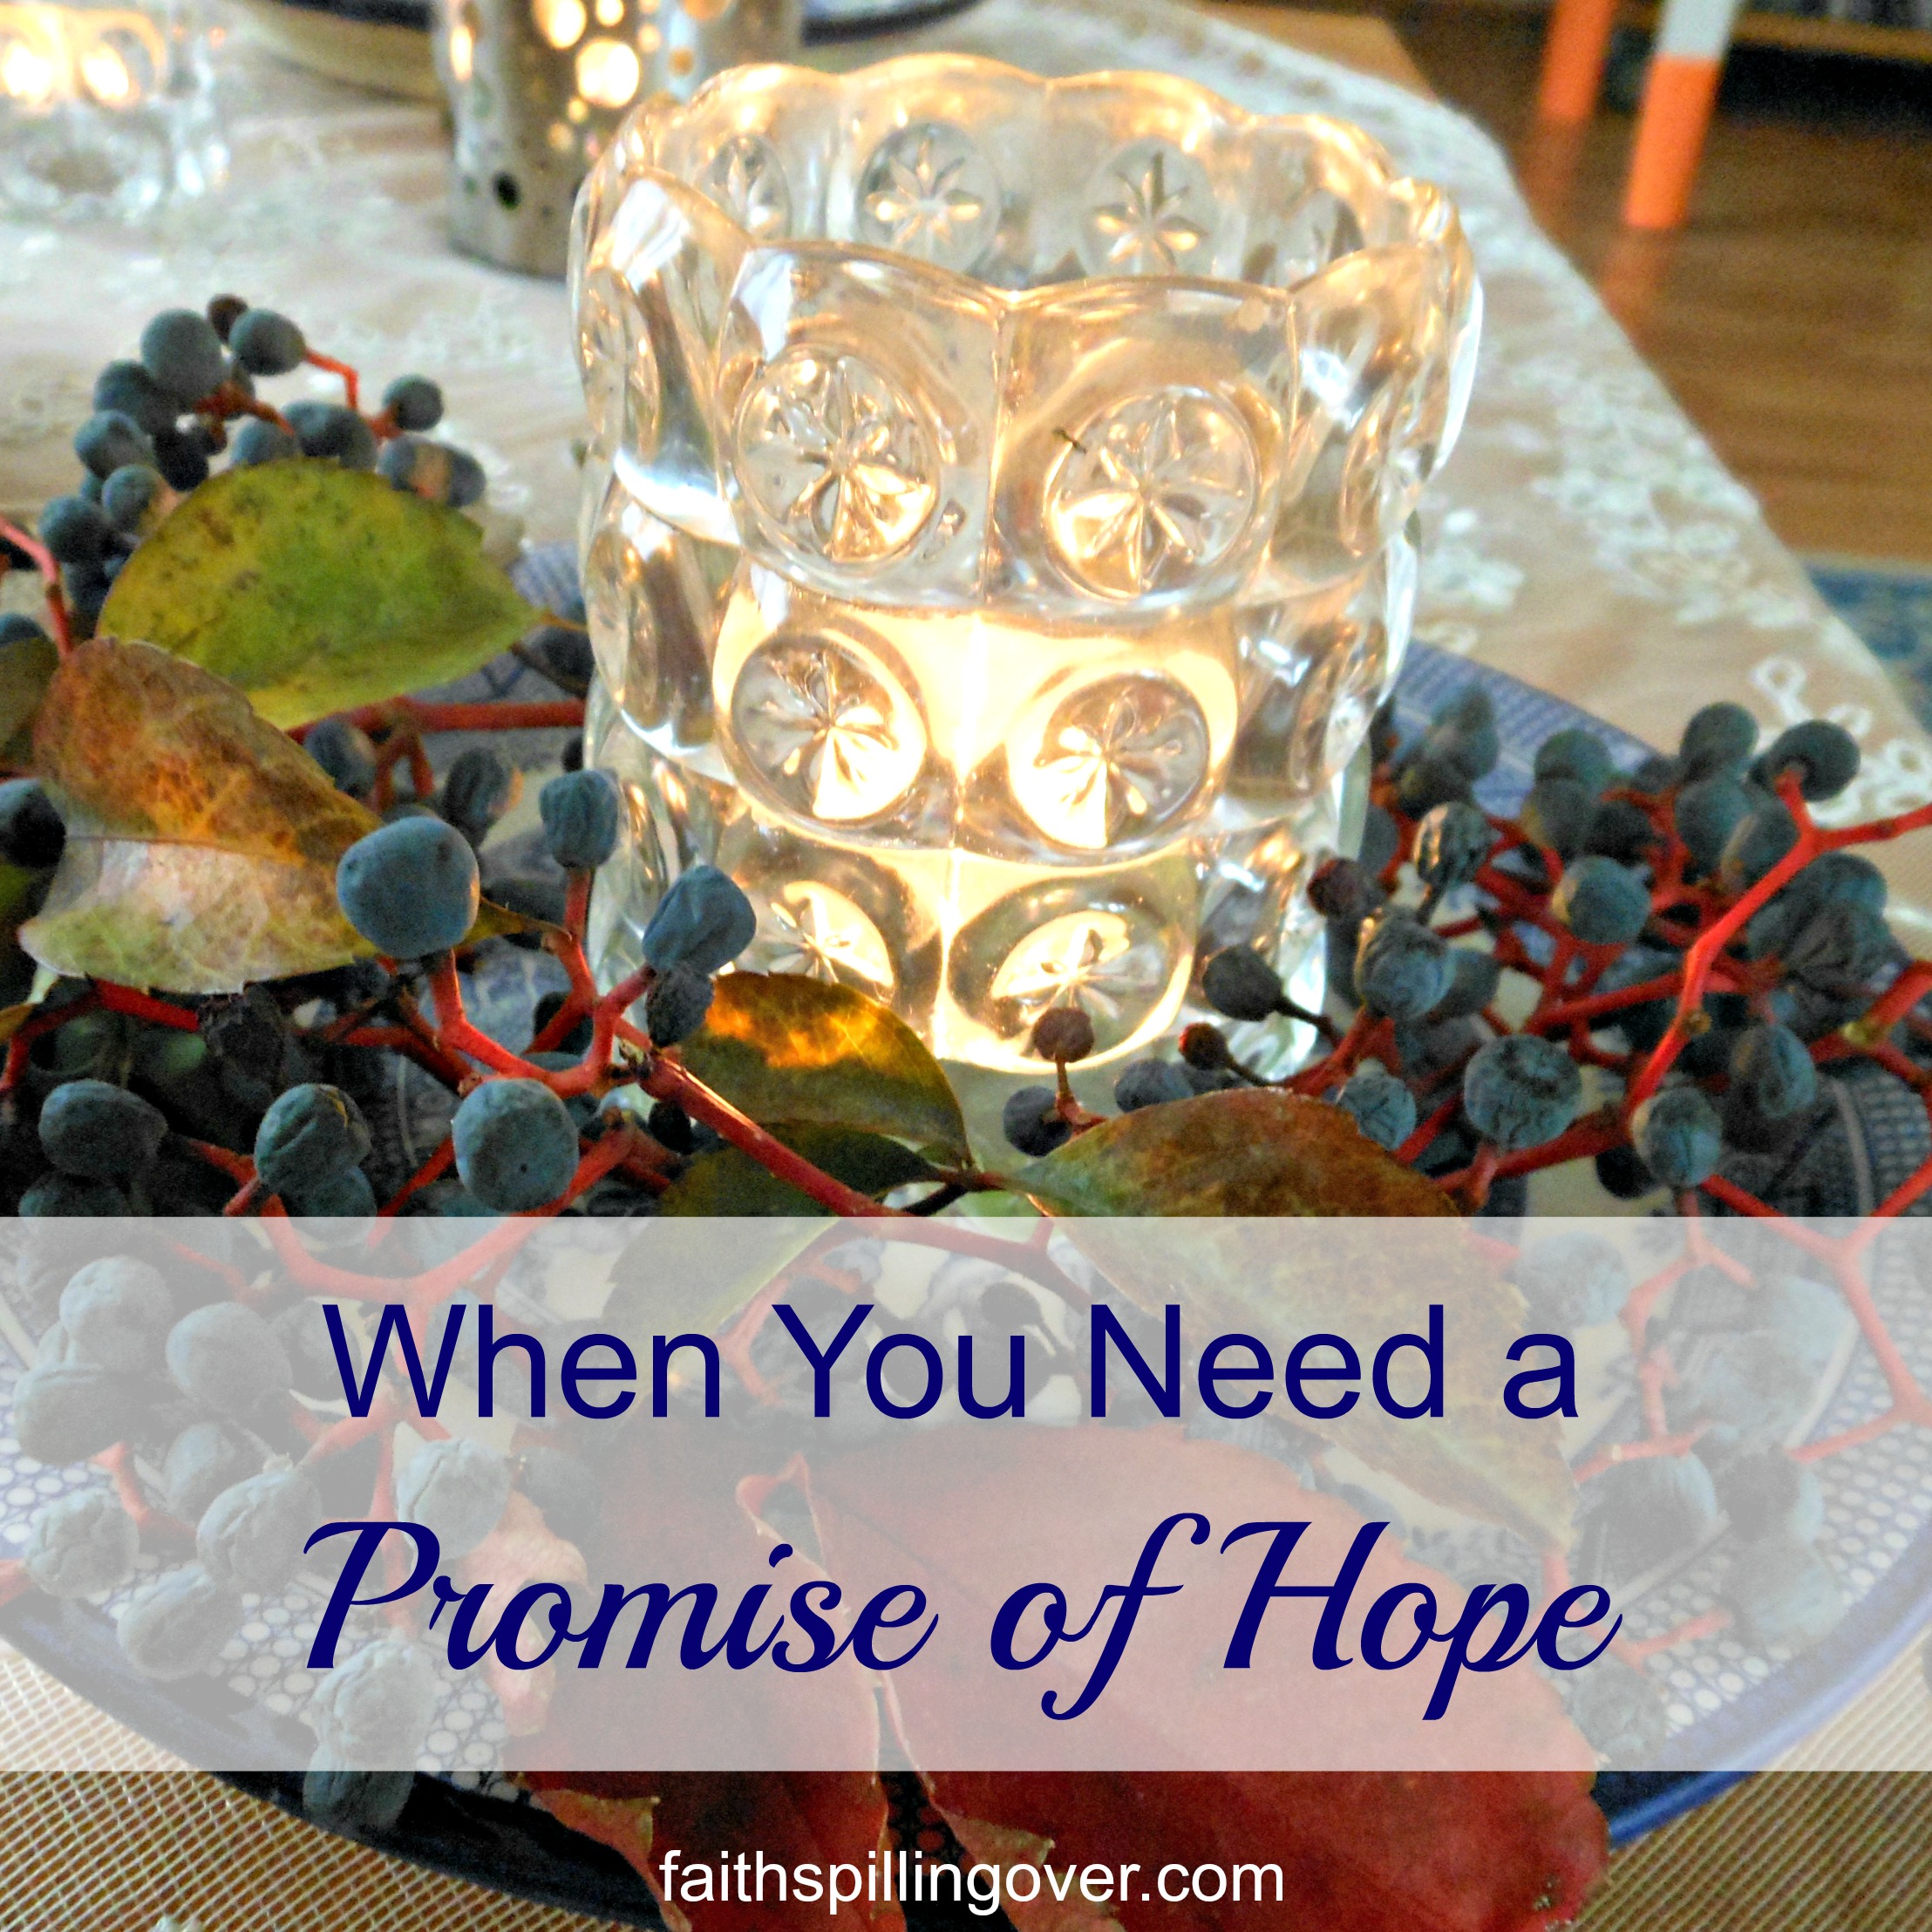 Jesus gives us a promise of hope for dark days, so let's stay close to the Light with these simple steps.